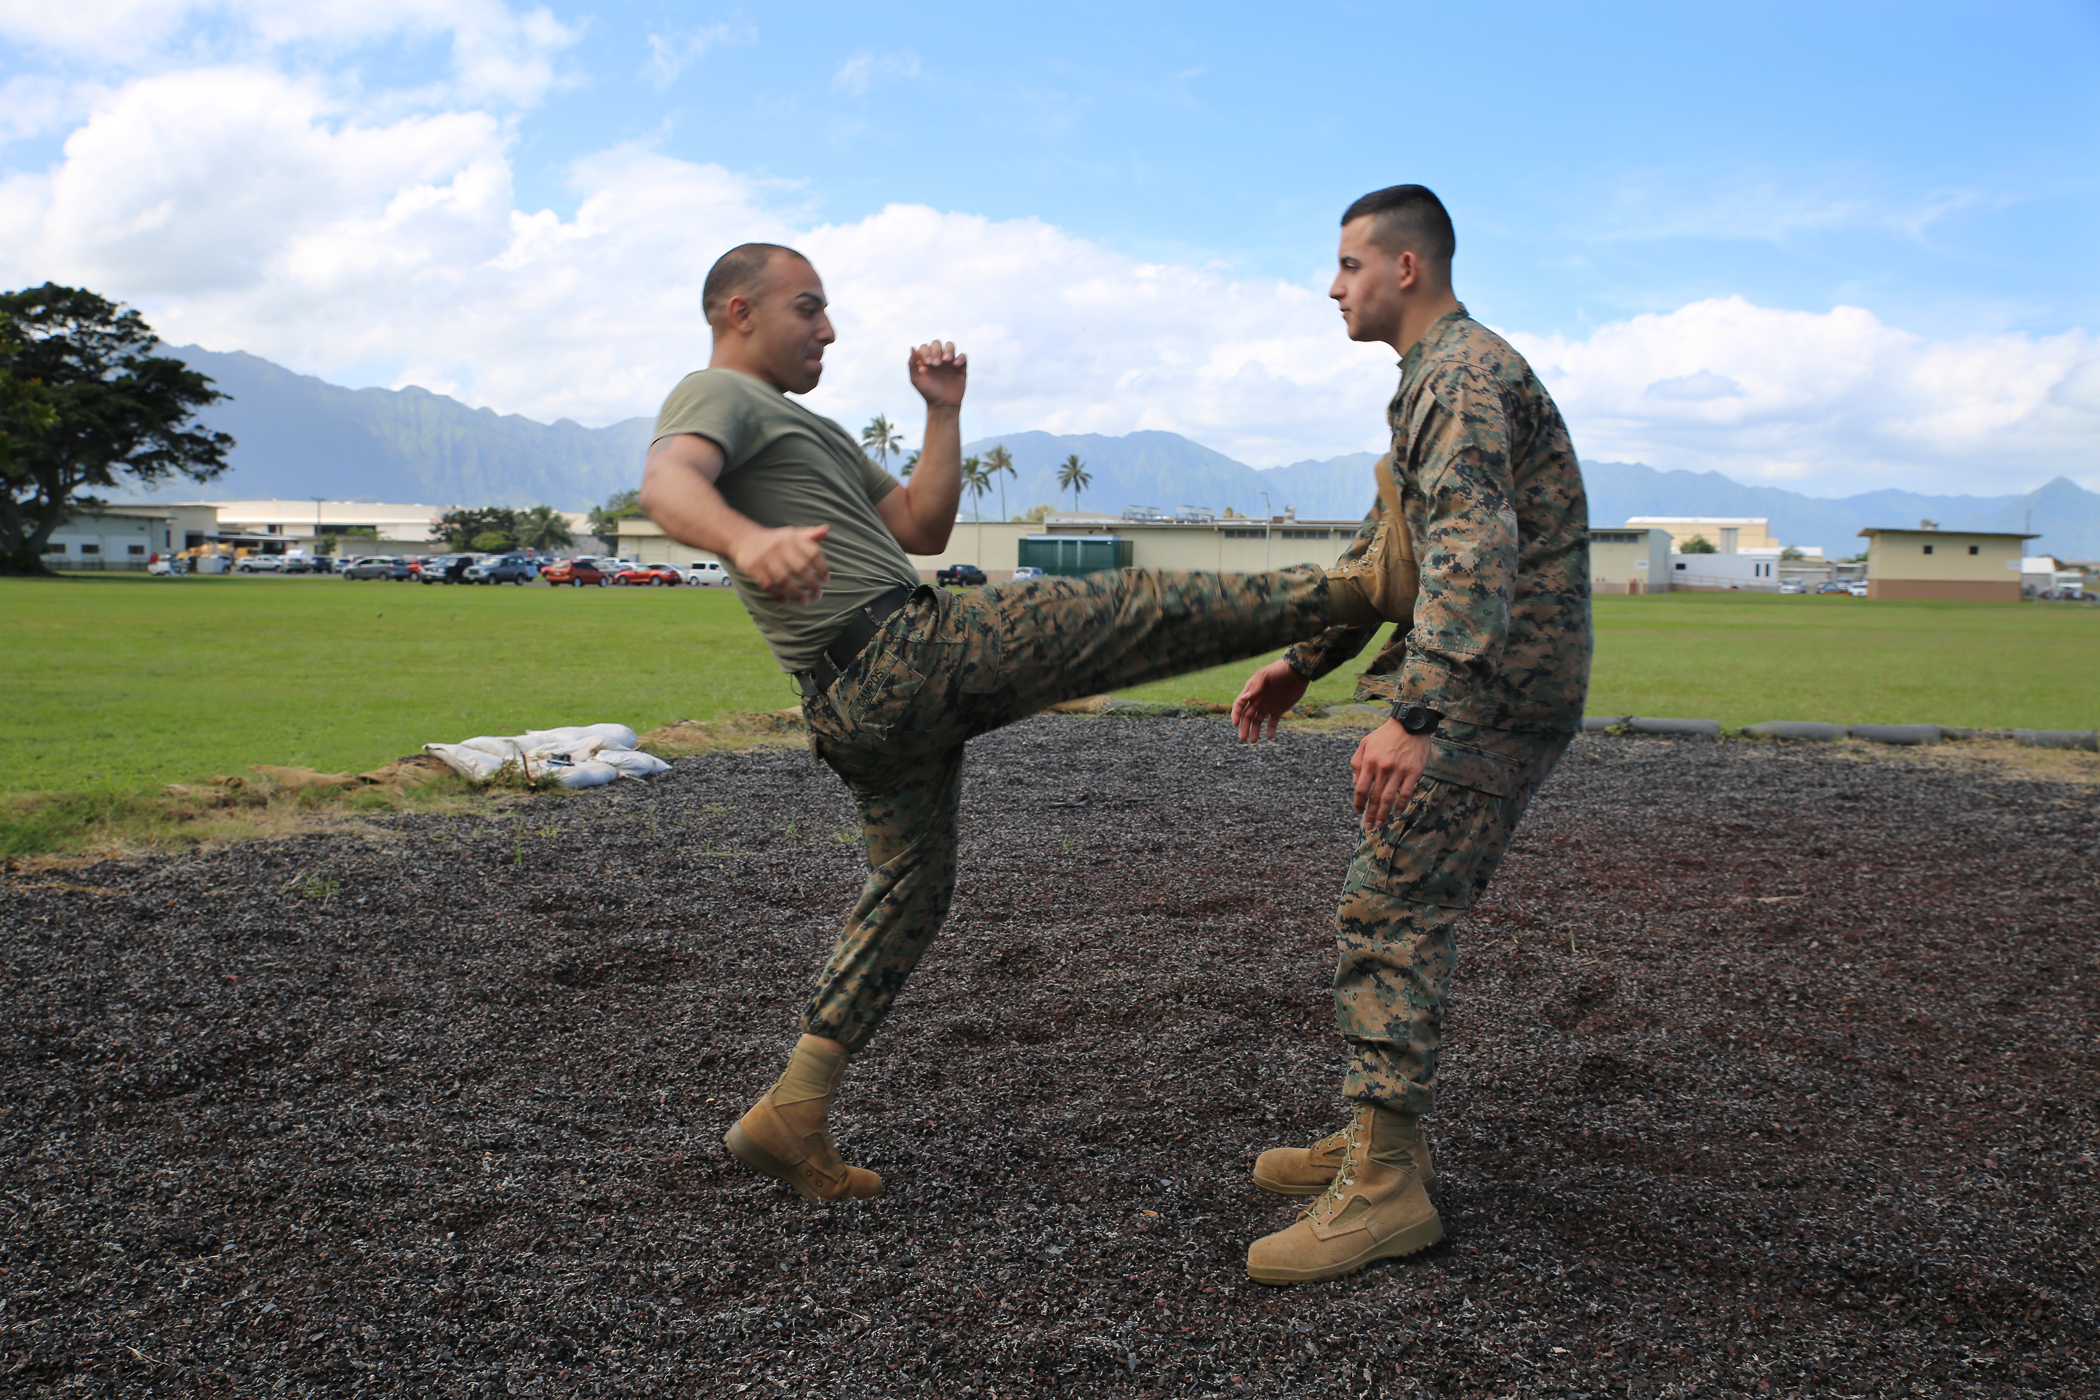 Best Of martial arts instructor marine corps Corps martial